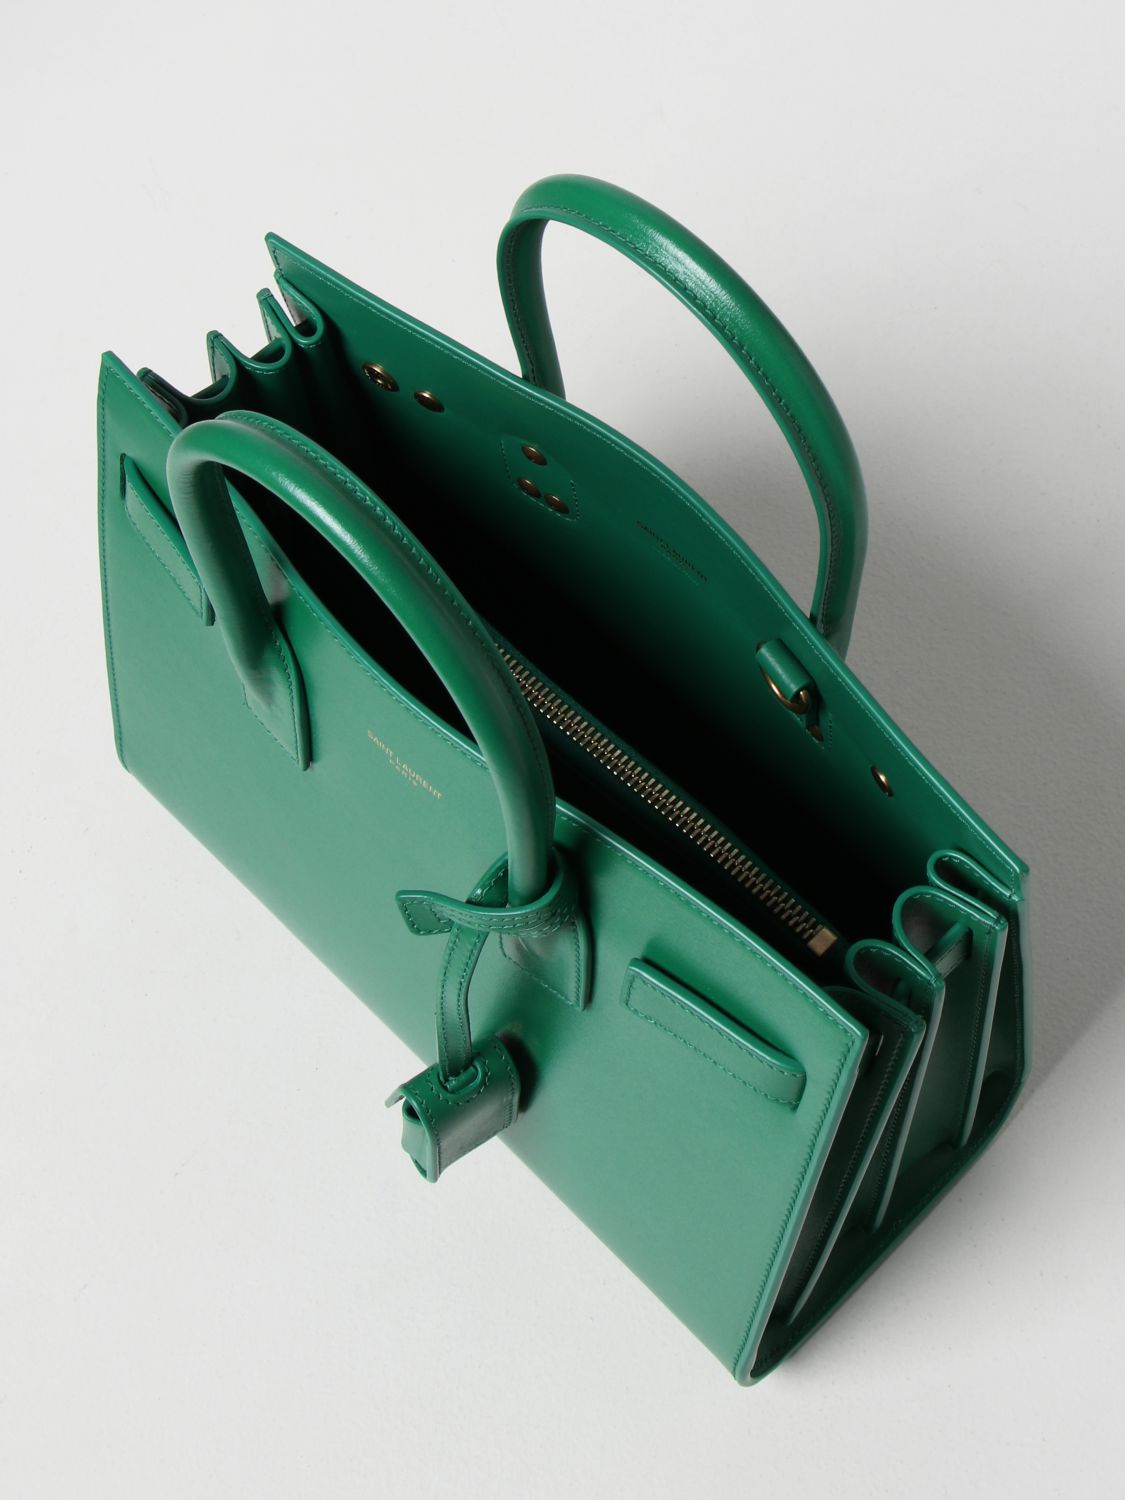 Sac de jour leather tote Saint Laurent Green in Leather - 35502612